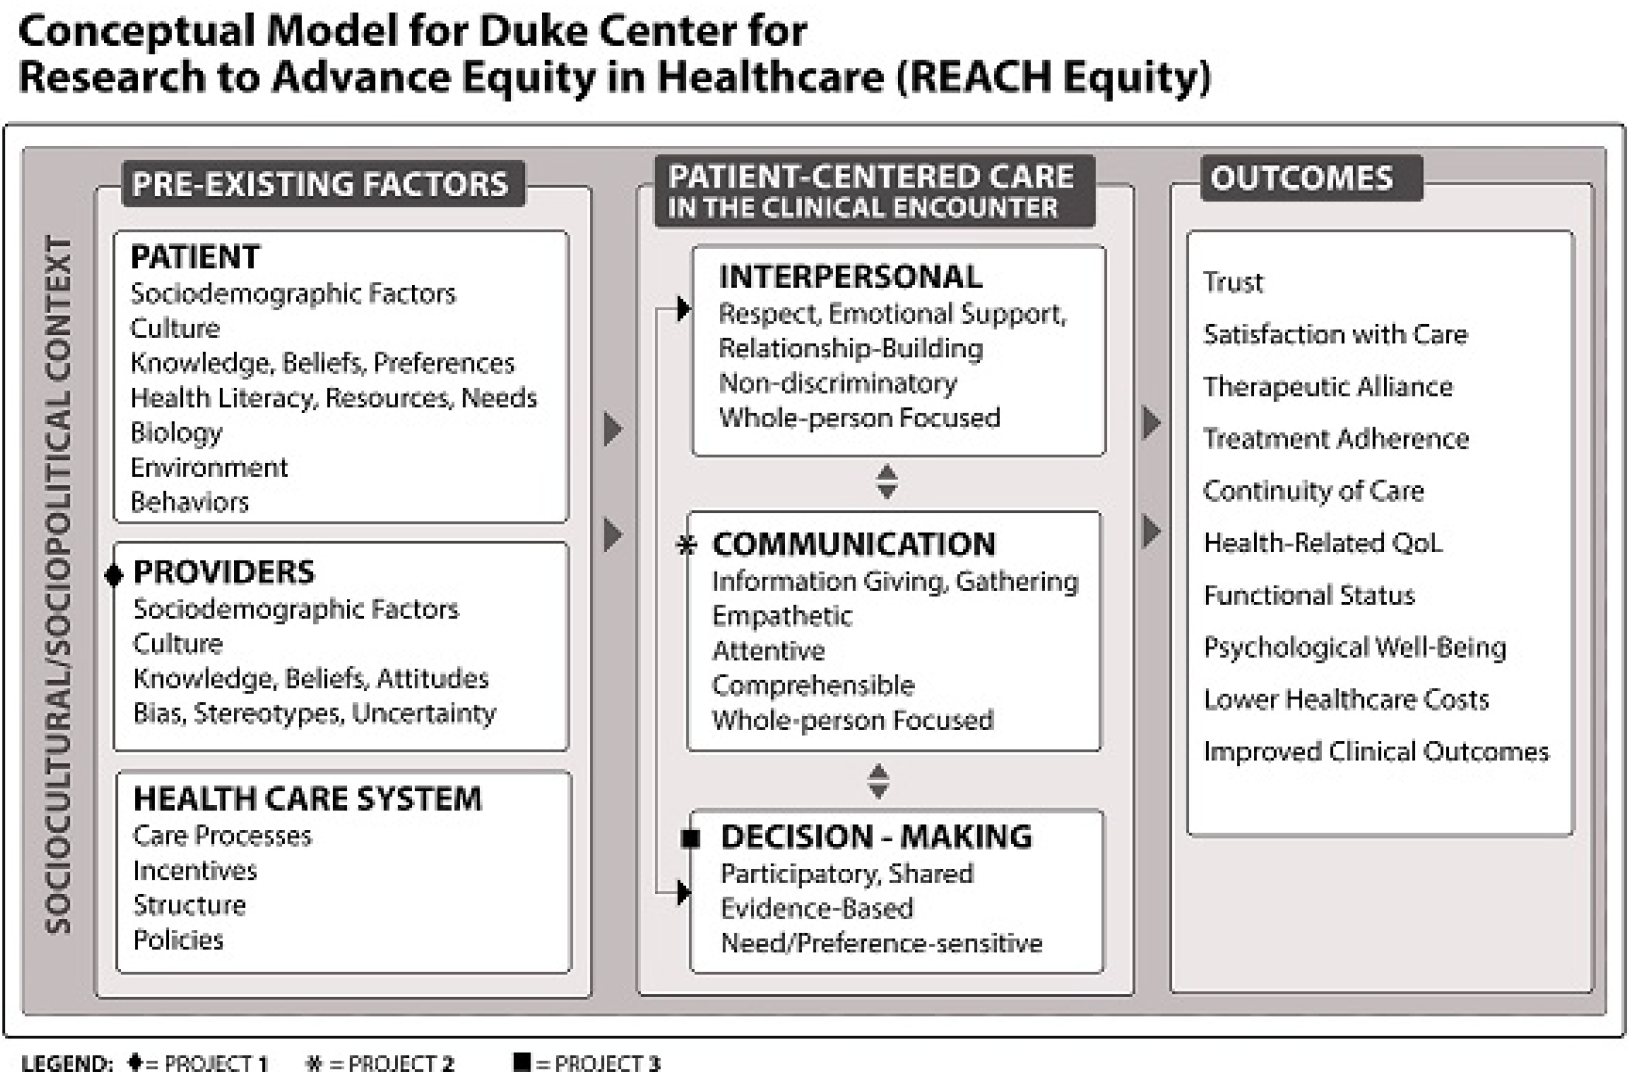 This is a conceptual model chart that represents the ideas and concepts REACH Equity was built on, including an outline of REACH Equity's Center Research Projects.